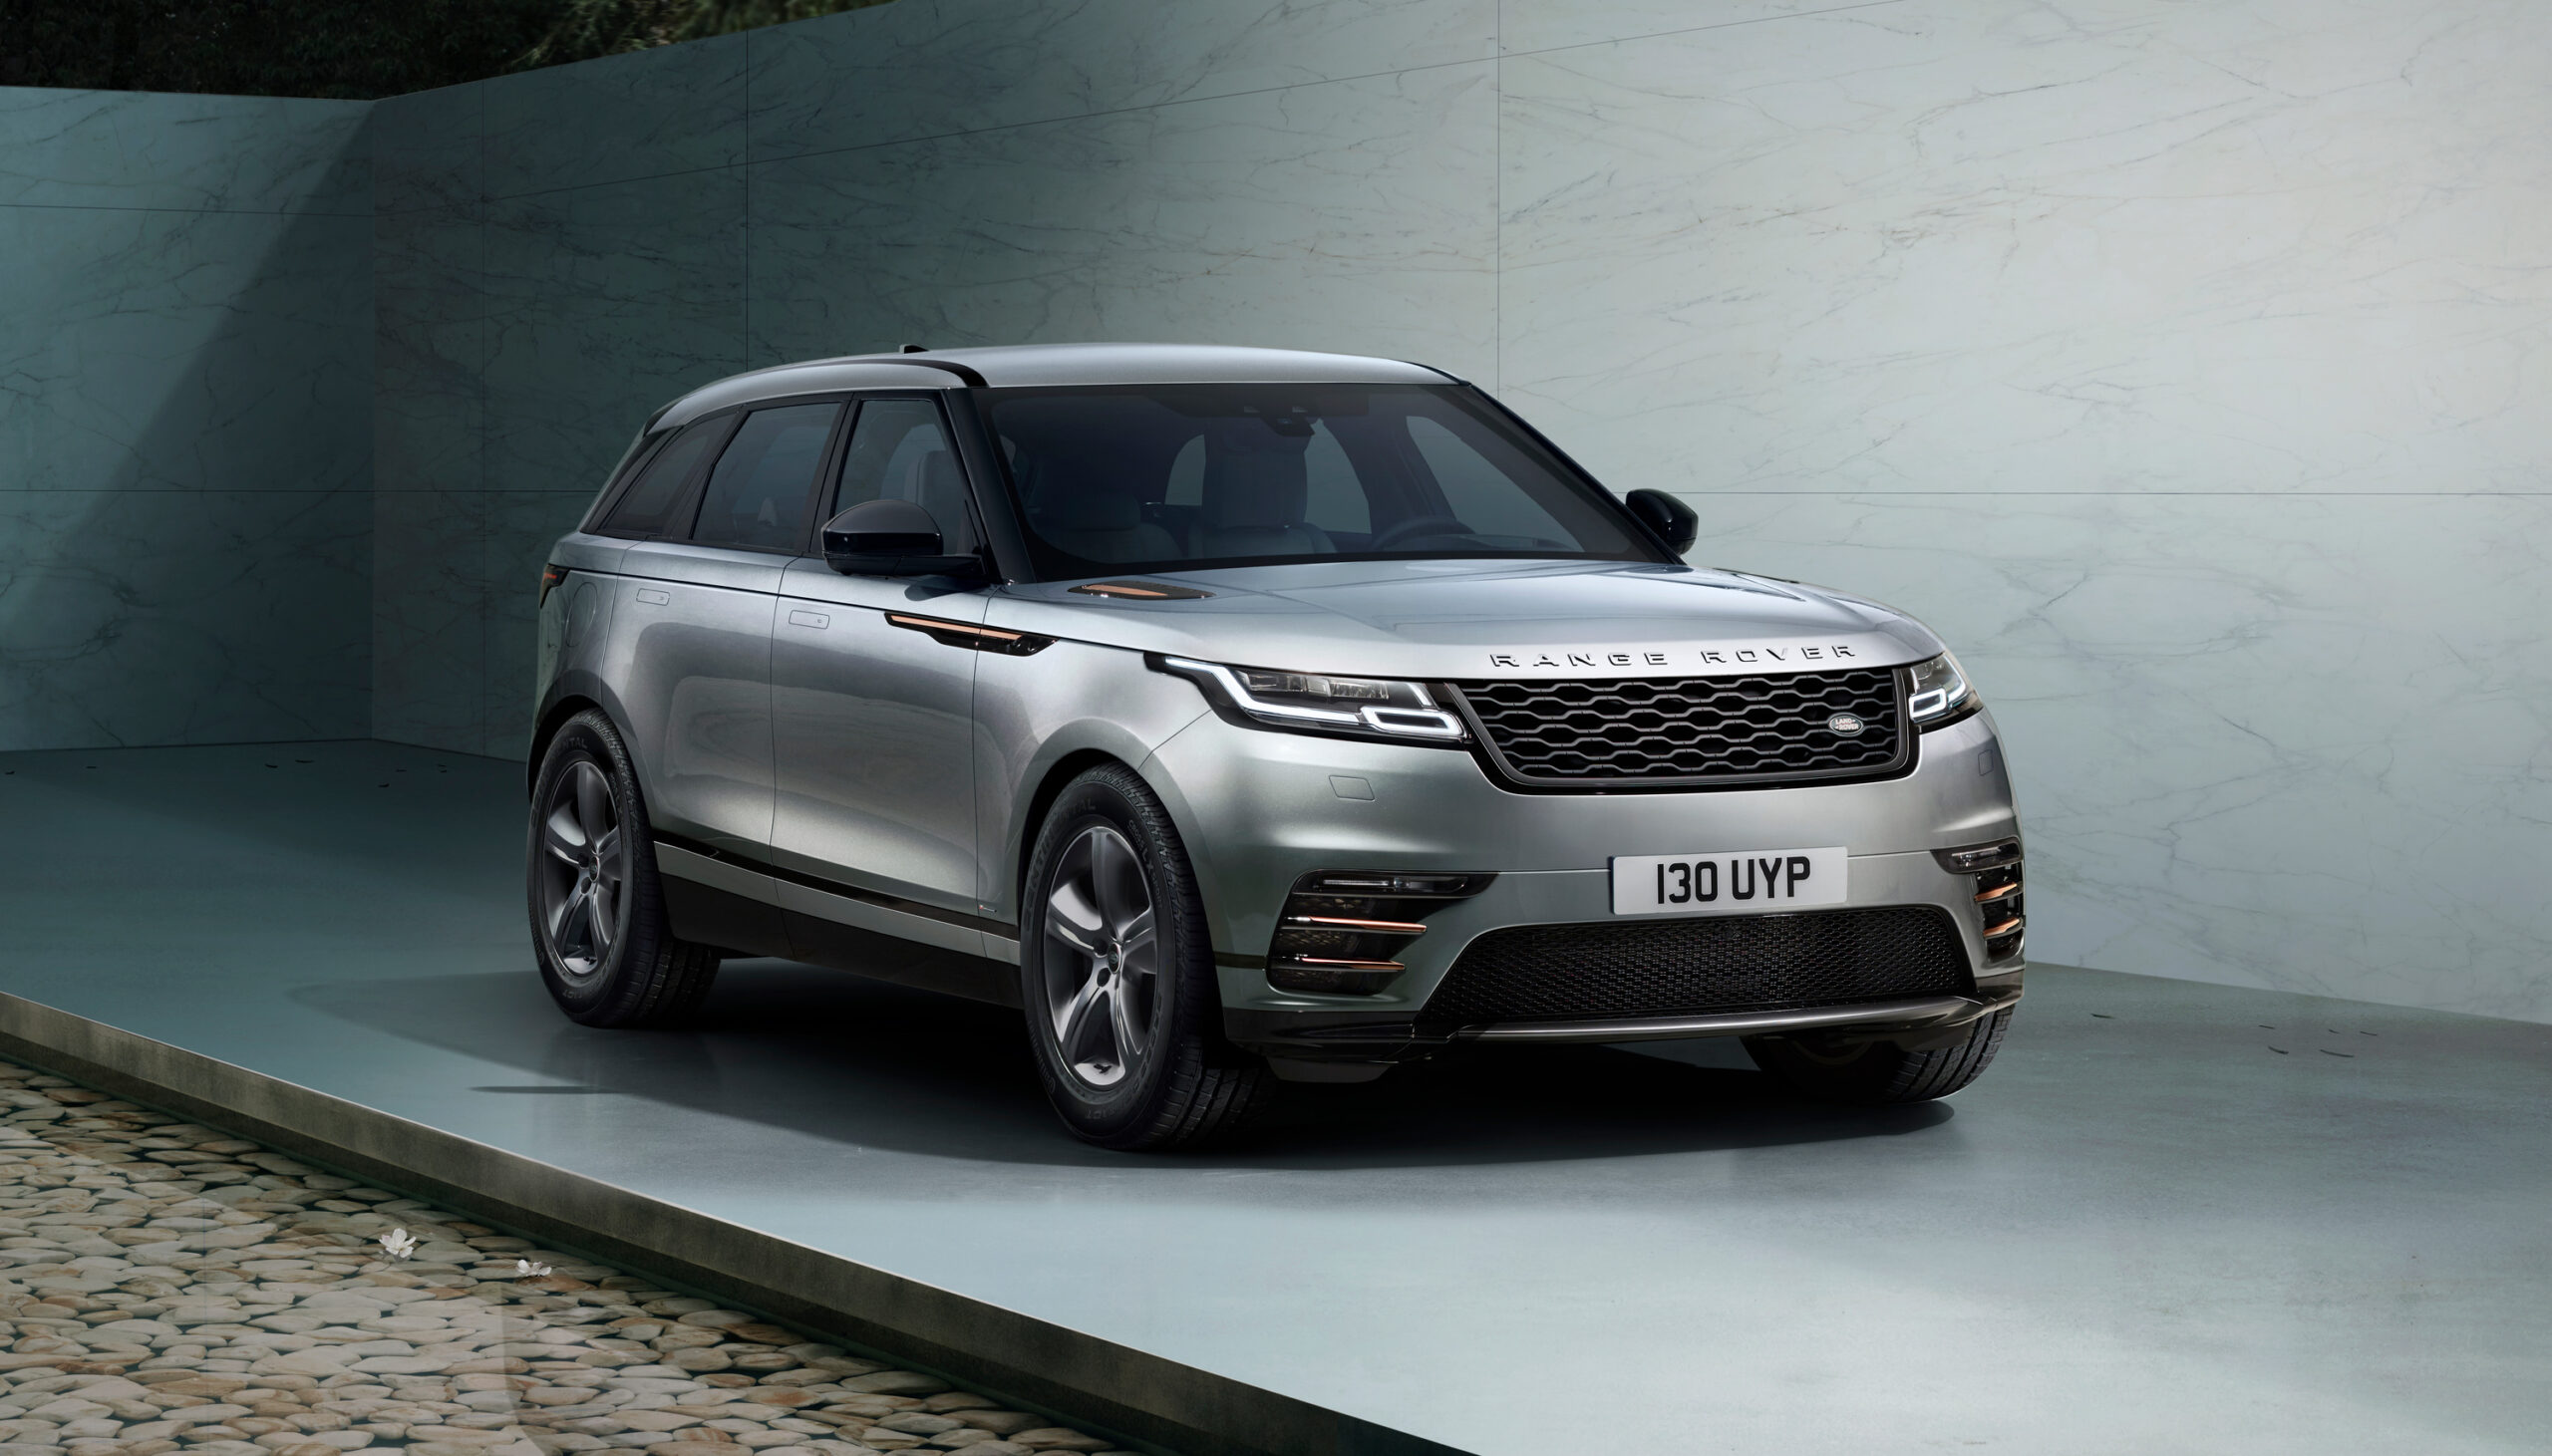 Range Rover Velar Introduced in India, Price Starts At Rs. 79.87 lakh